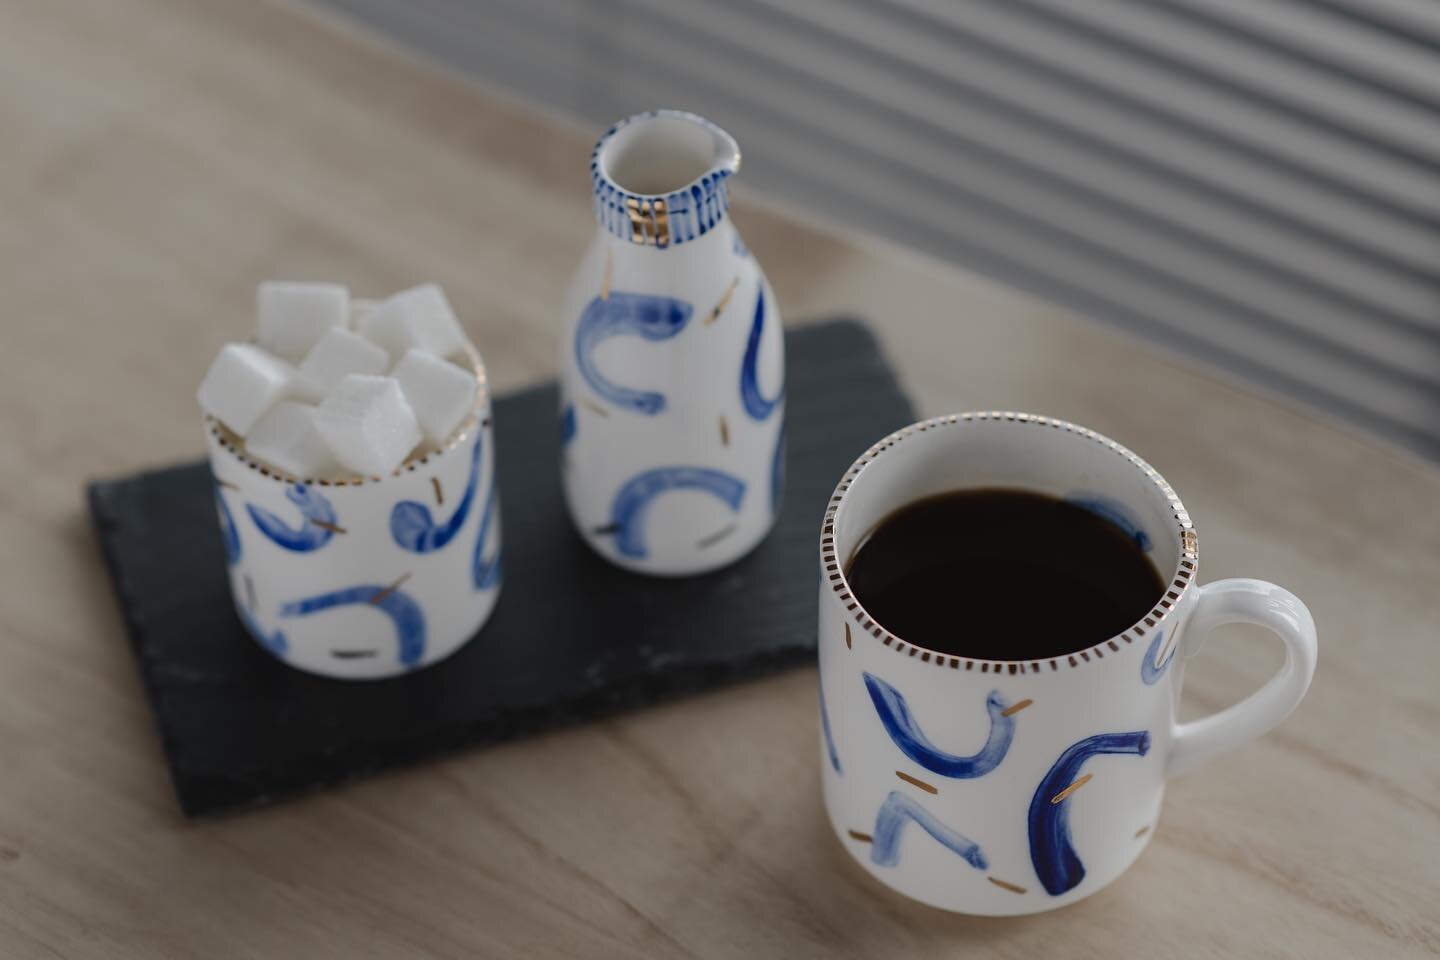 Rainy bank holidays call for a good coffee at home and some online retail therapy. Check out our Cobalt Cups on @inkloverni online store 👌🏼#rebeccakillenceramics #blueandwhite #handmadeceramics #irishdesign #handmadeinireland #inklover 📸 @estherir